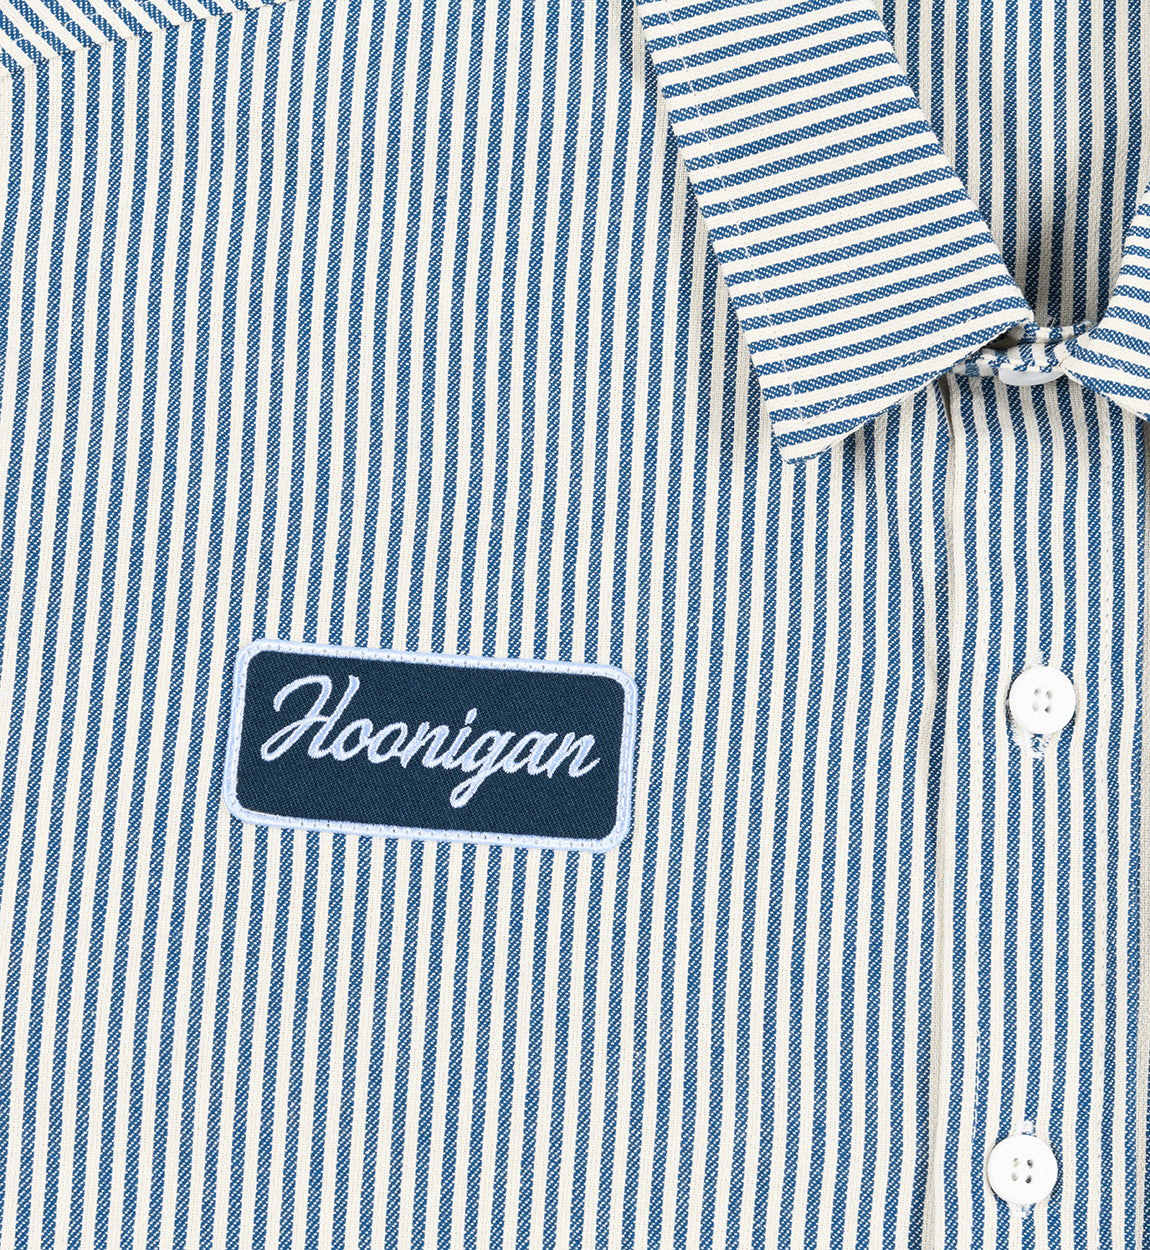 Traditional hickory striped work wear inspired Hoonigan short sleeve for your next build or just a day out with the squad. Plus, bonus, pocket pencil holder slot in the left pocket!